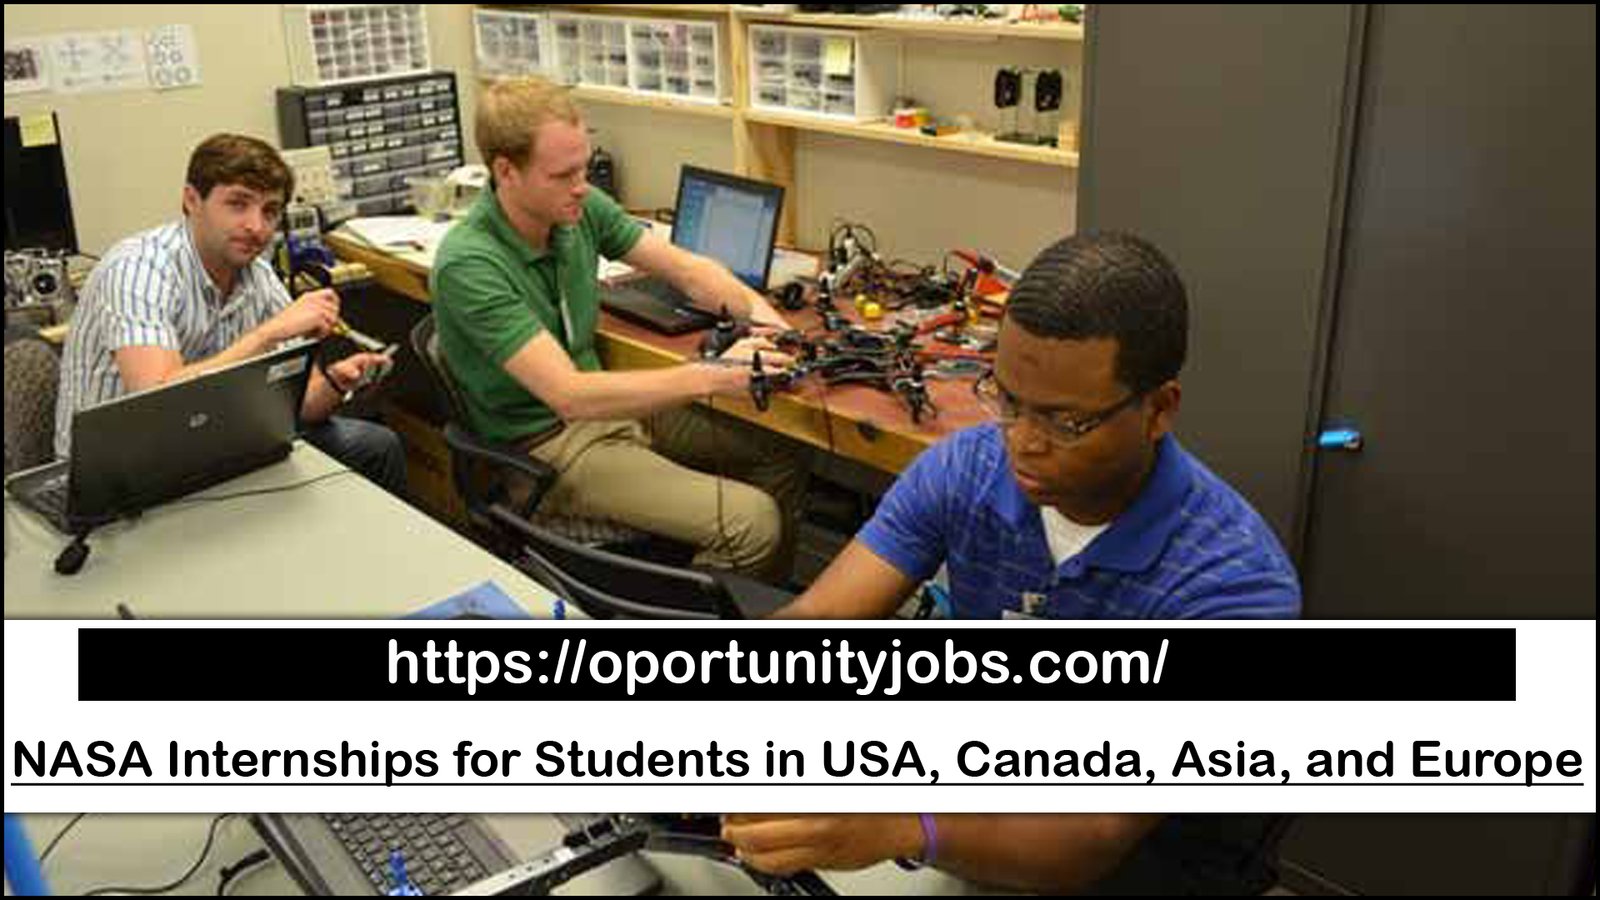 NASA Internships for Students in USA, Canada, Asia, and Europe